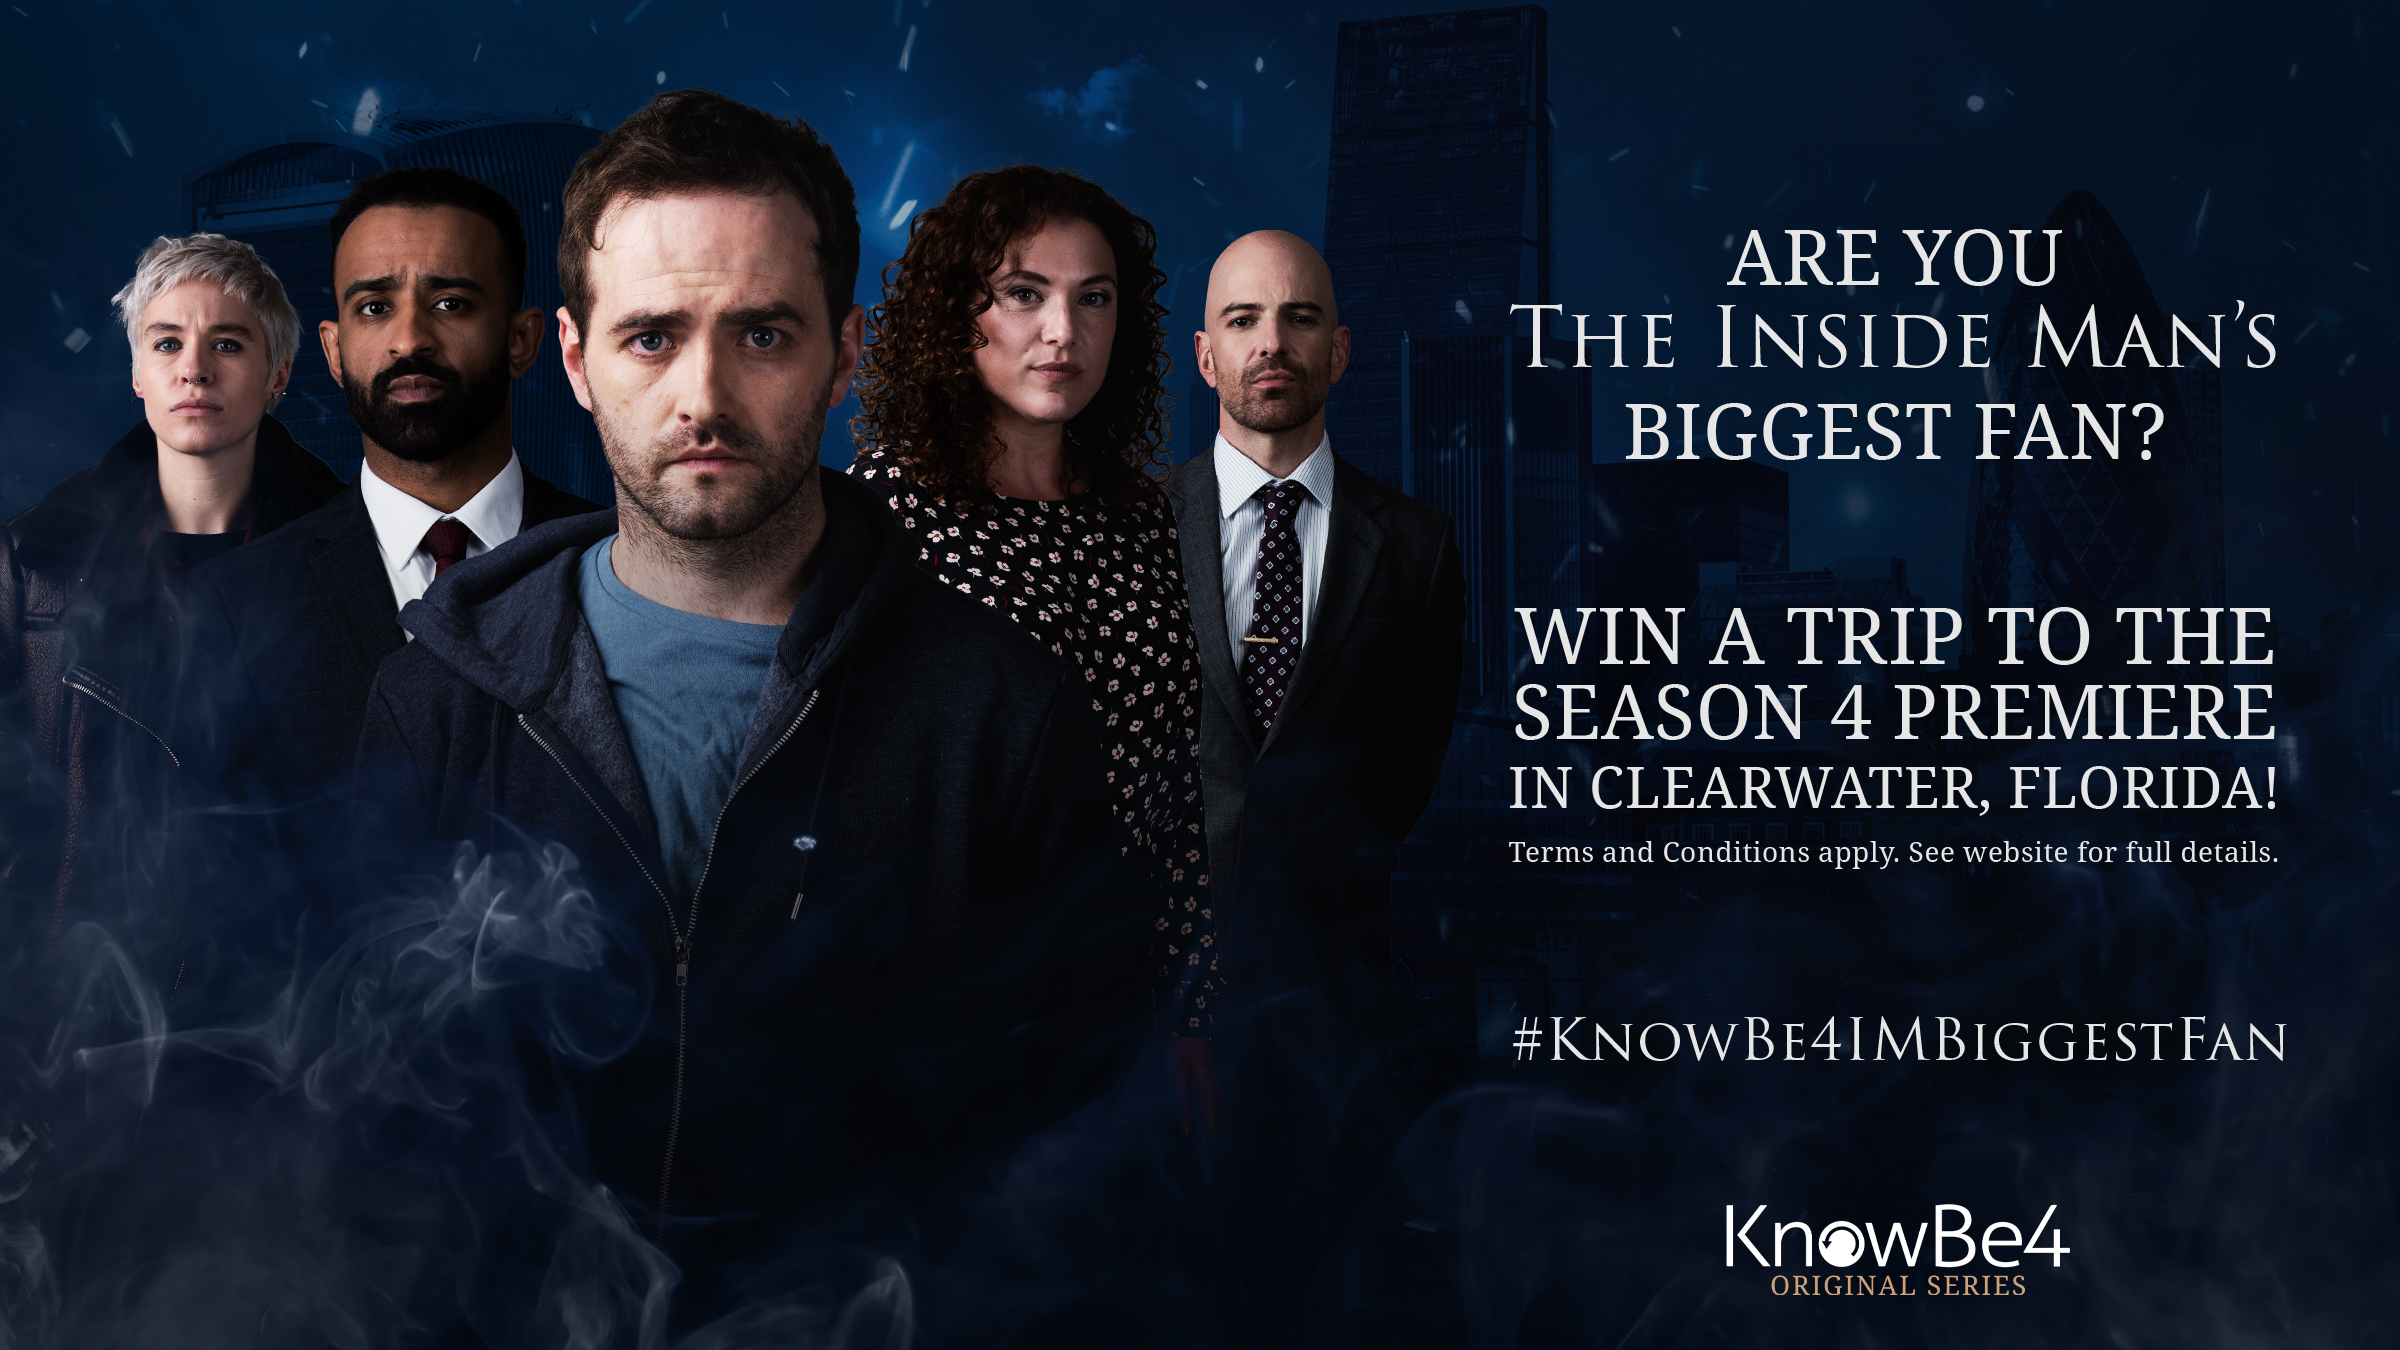 KnowBe4 Launches Contest for The Biggest Fan of Popular Series “The Inside Man”